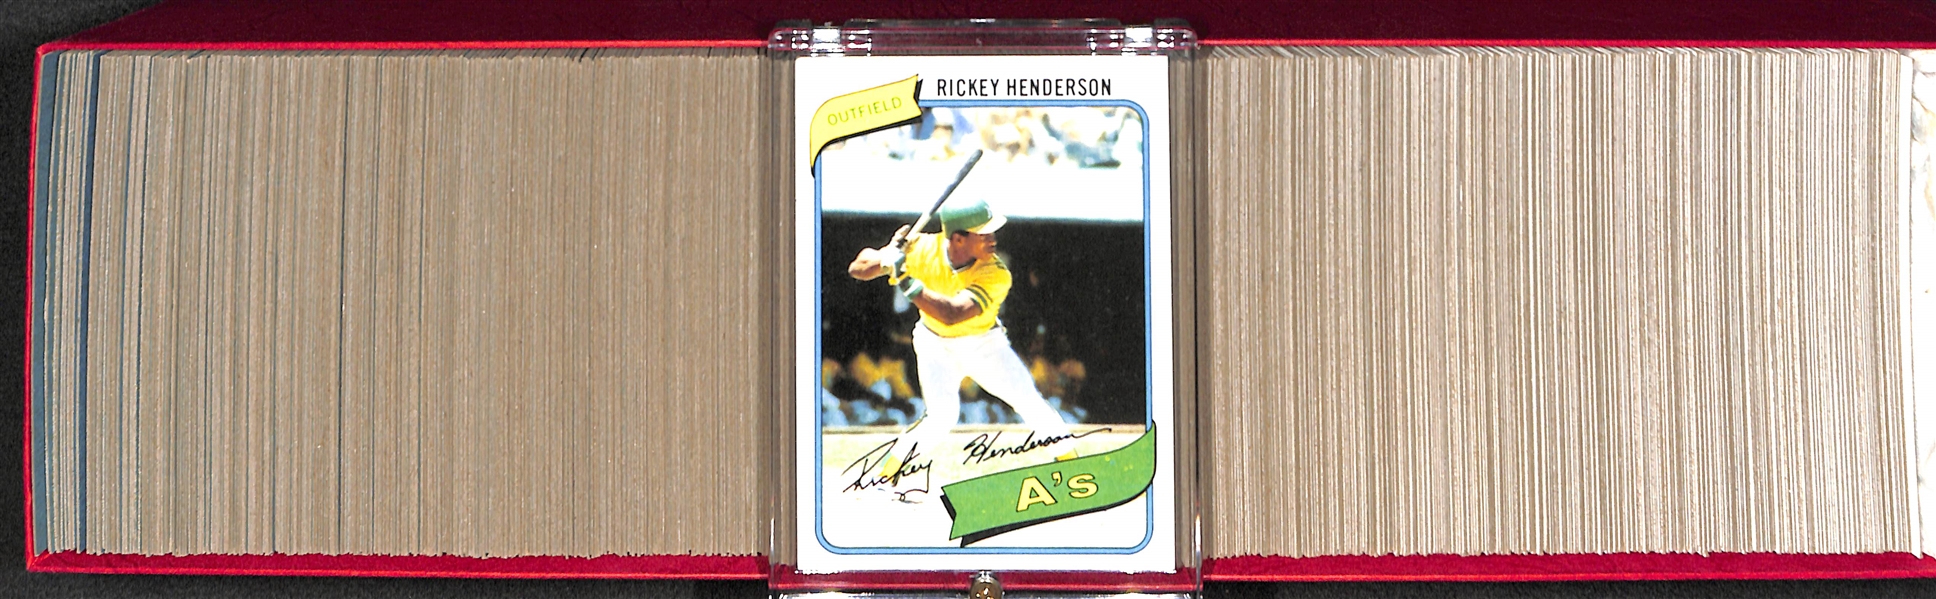 1980 Topps Baseball Complete Set Featuring Rickey Henderson Rookie